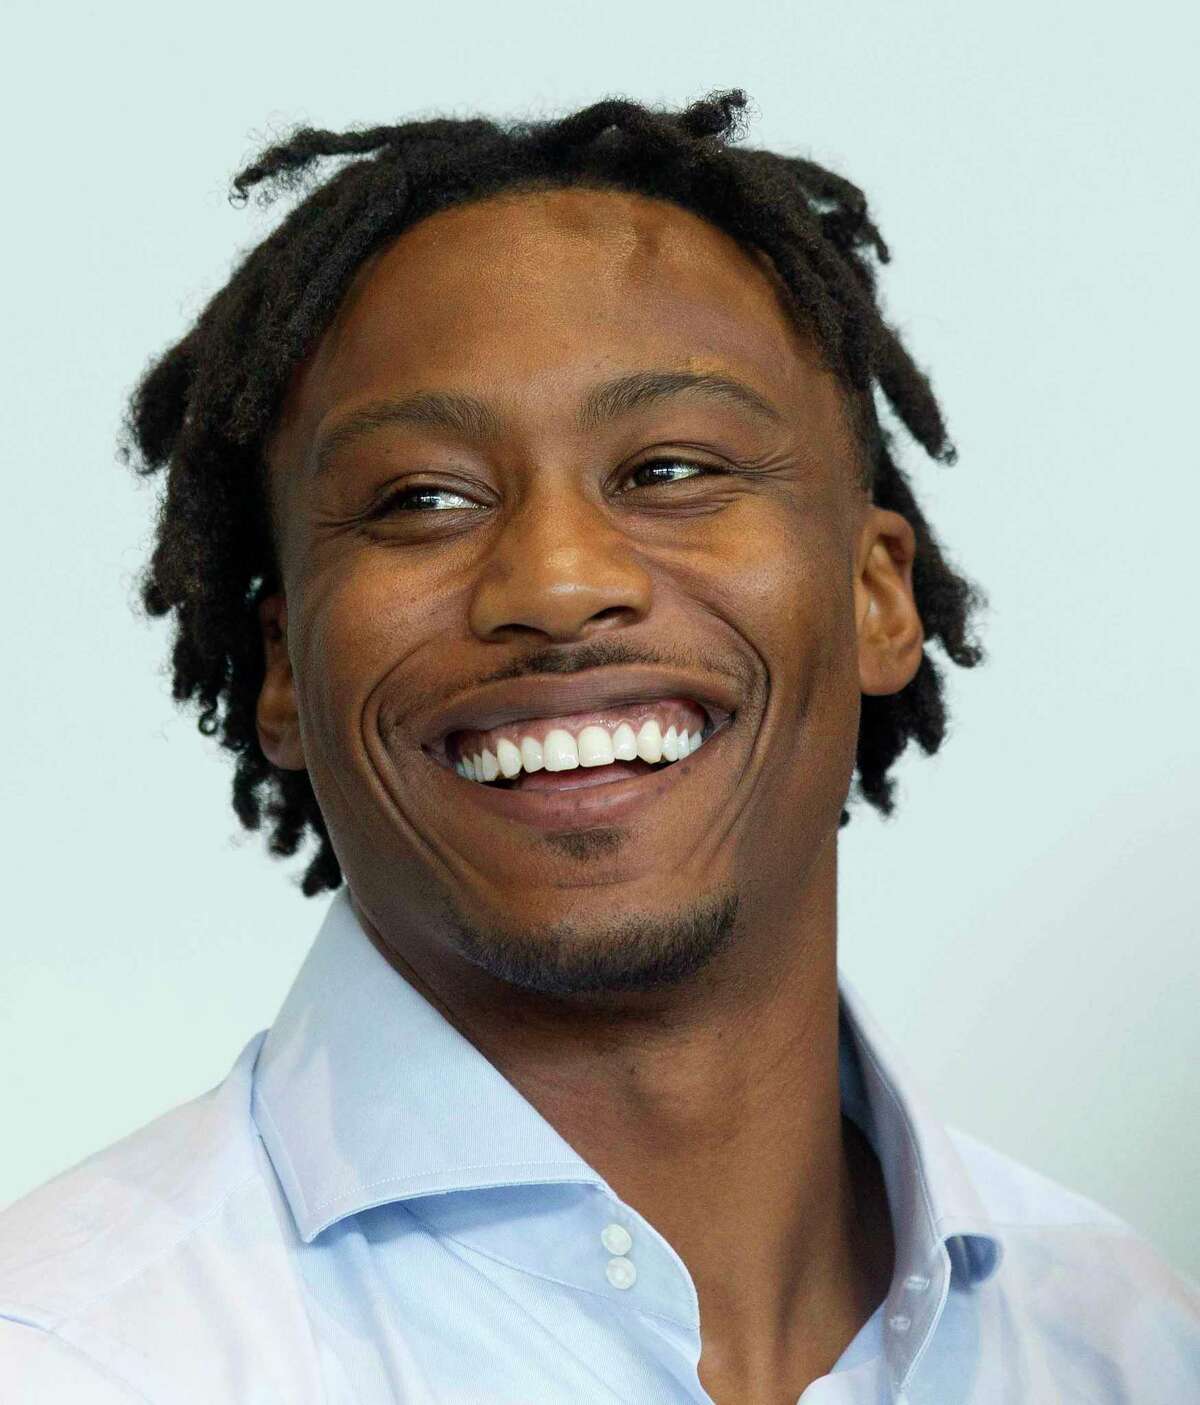 Brandon Marshall, NFL wide receiver with the New York Giants, laughs during a sports forum titled "Going Pro" at The Woodlands Country Club, Wednesday, July 12, 2017, in The Woodlands. The 10-person panel comprised of athletes, health care providers and others from the sports industry offered advice and answered questions about college recruitment and competing at the professional level.